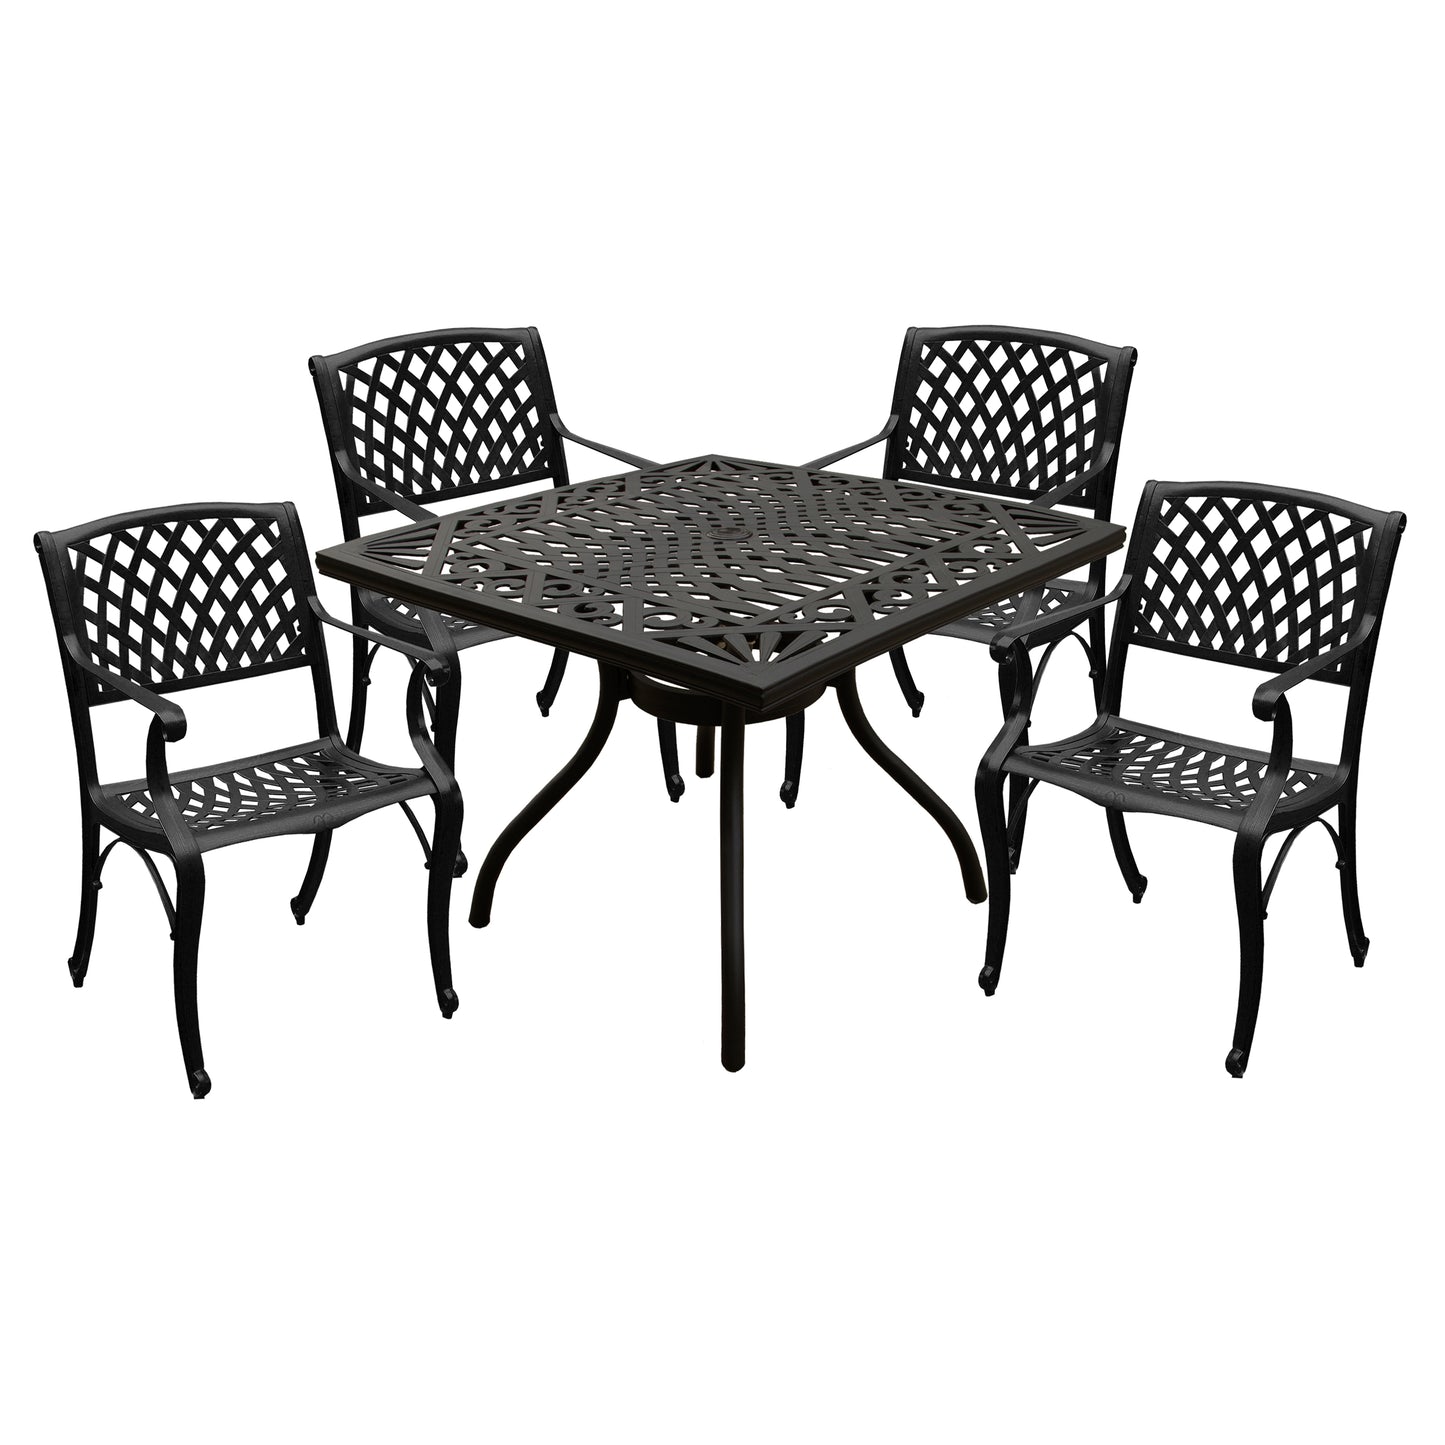 Outdoor Aluminum 5pc Square Black Patio Dining Set with Four Chairs